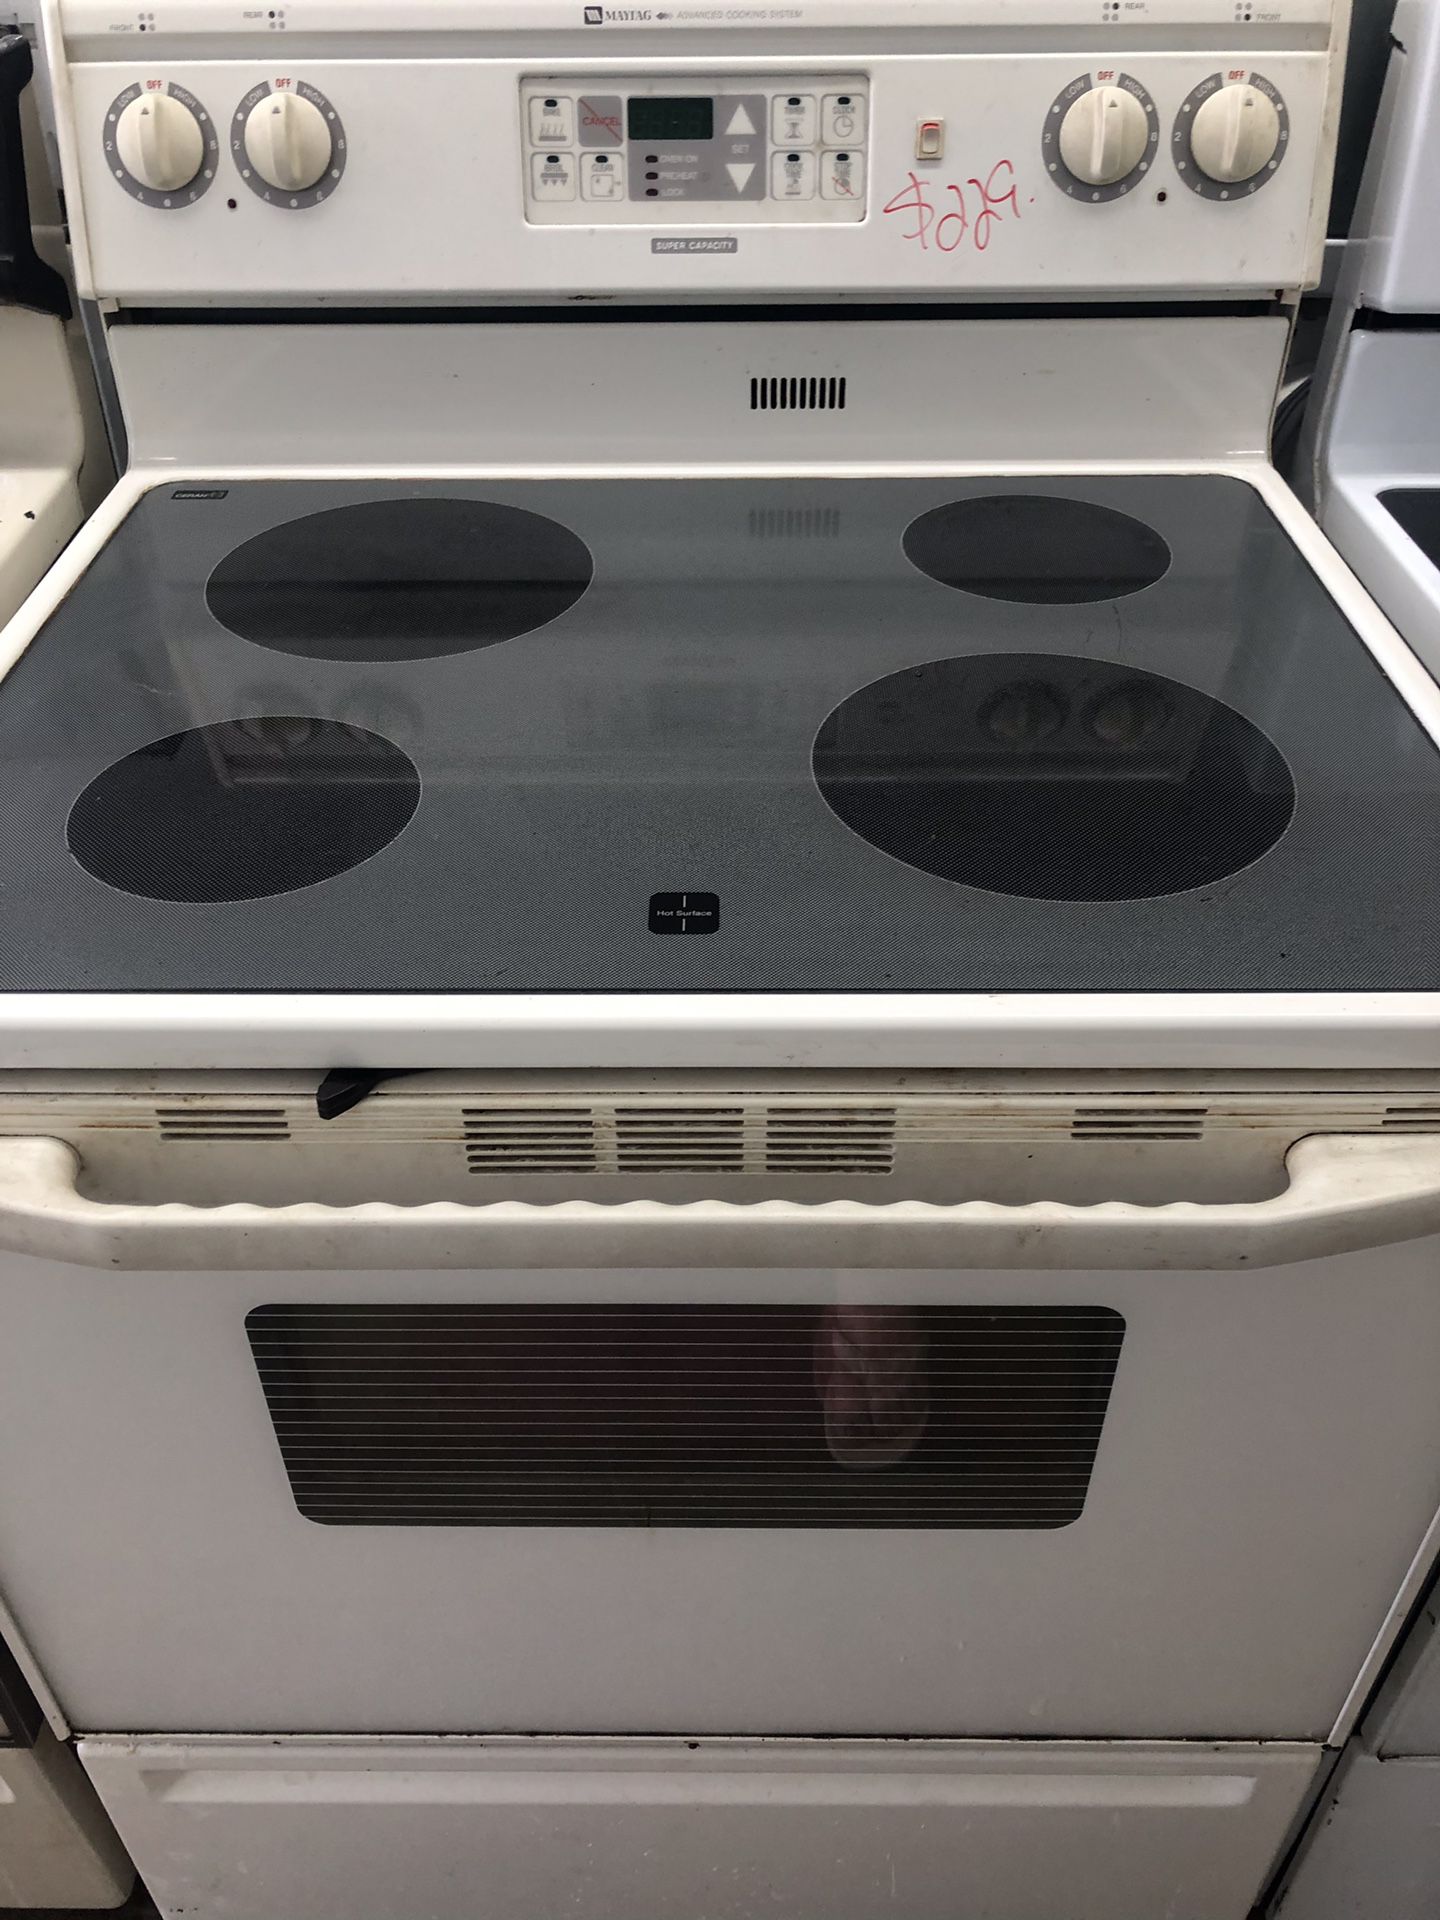 *Price Reduced* Maytag Bisque Glass Top Electric Stove Range! Guaranteed 30 Days! Delivery Available! Beautiful Maytag Bisque/Off White Electric St